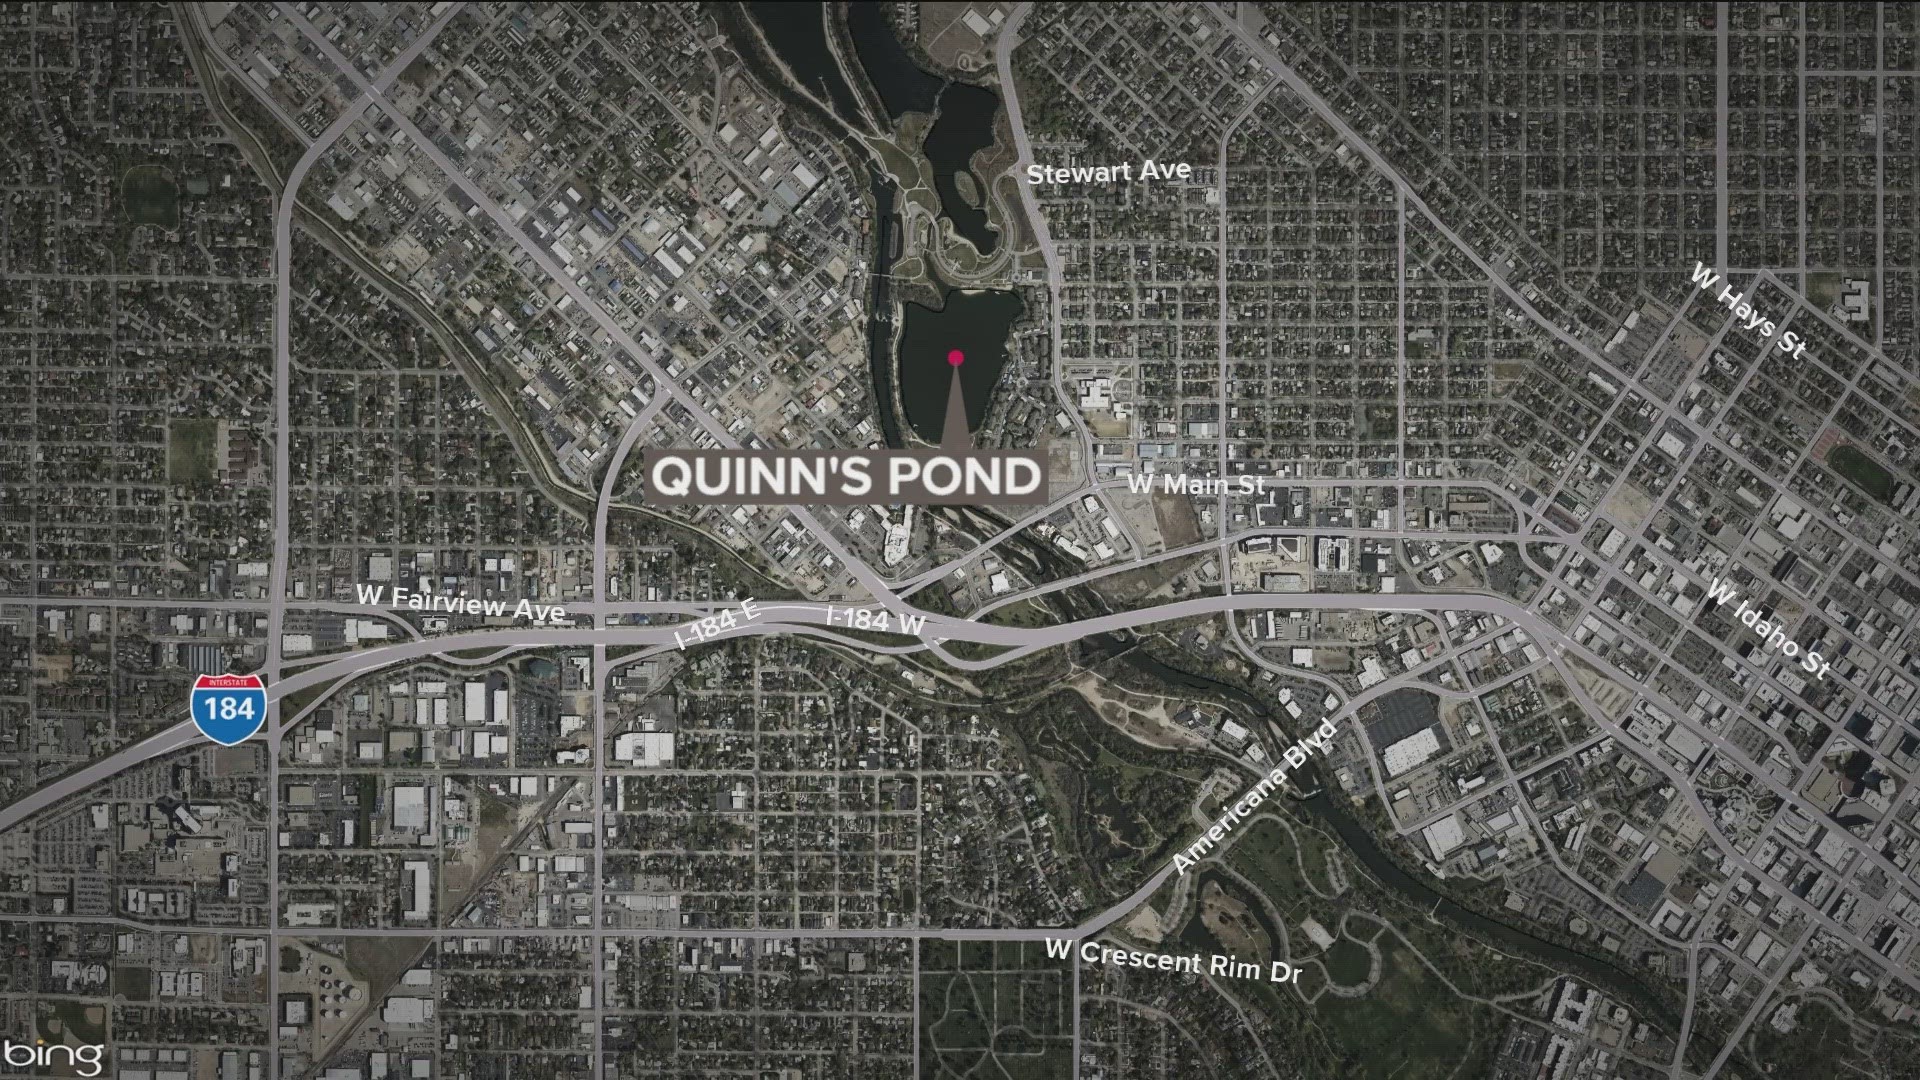 The 66-year-old man was paddle boarding Friday when he fell into the water and didn't resurface.